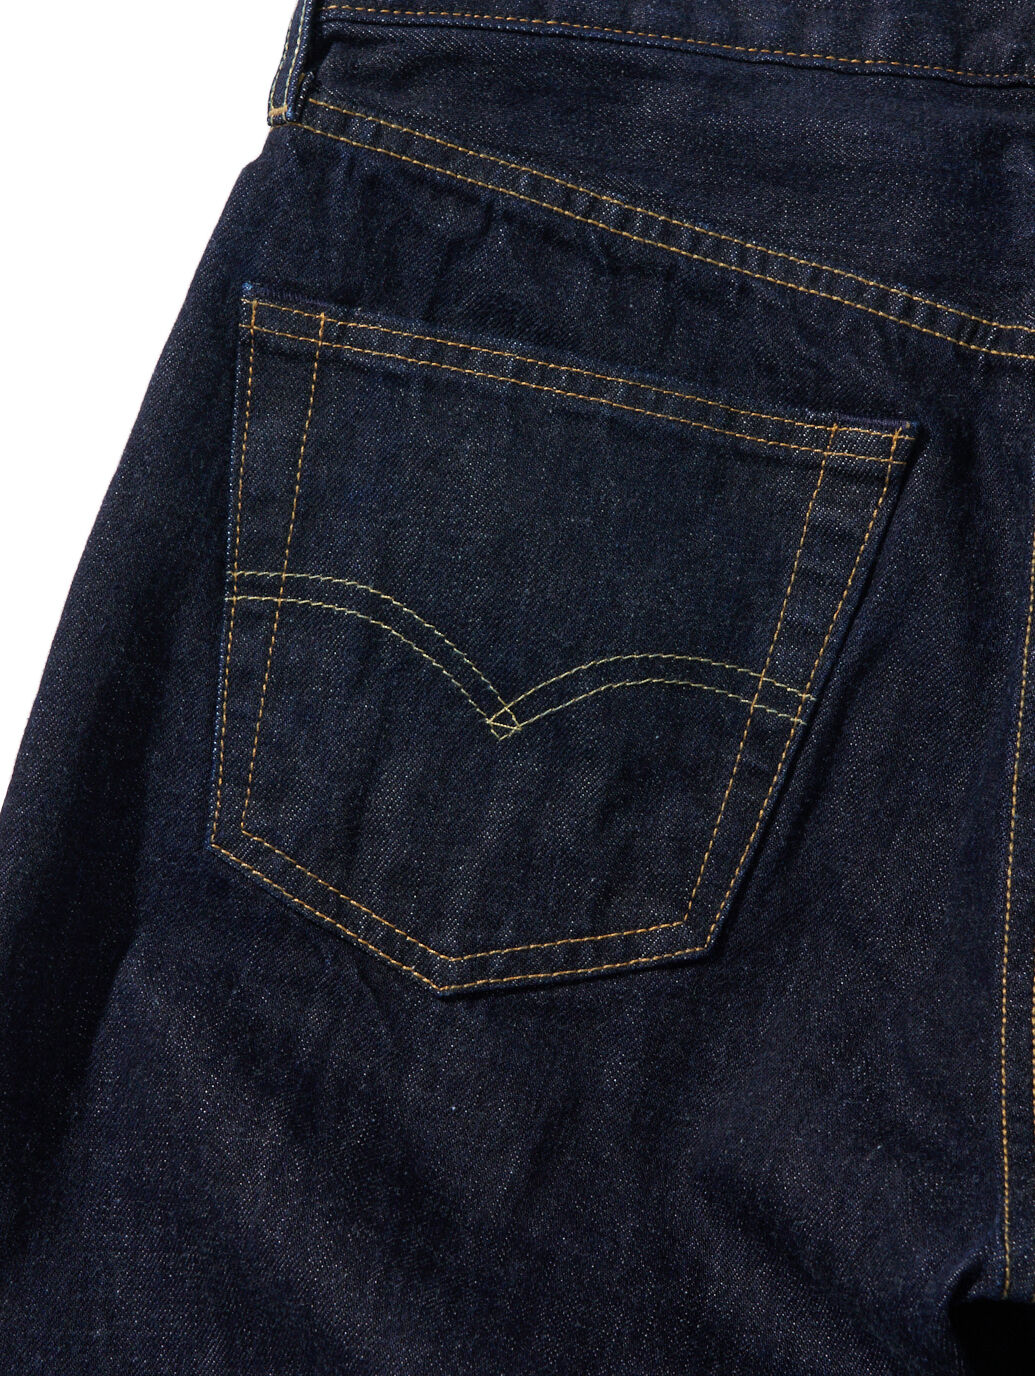 501® CUSTOMIZED EXPANSION JEANS V2 S/D｜リーバイス® 公式通販